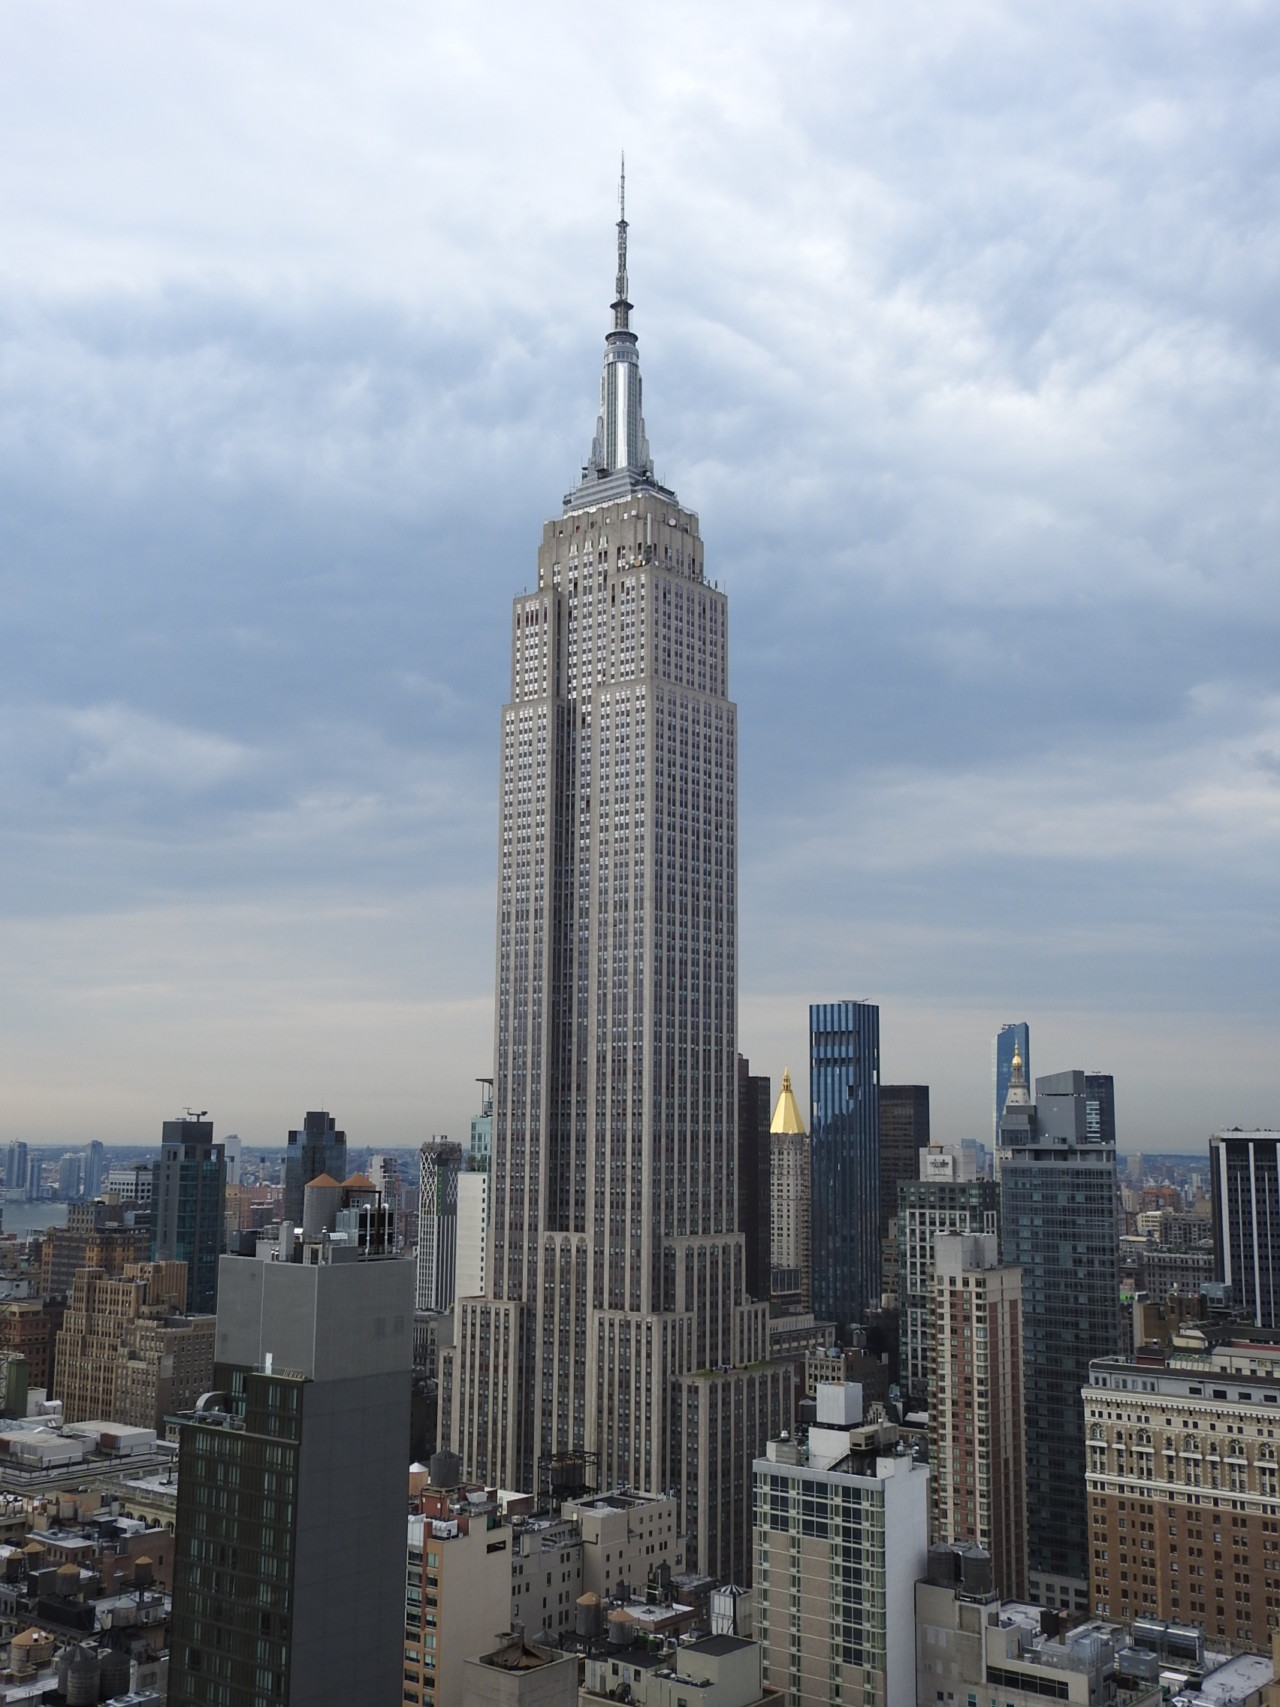 Image of the Empire State Building within the context of Manhattan